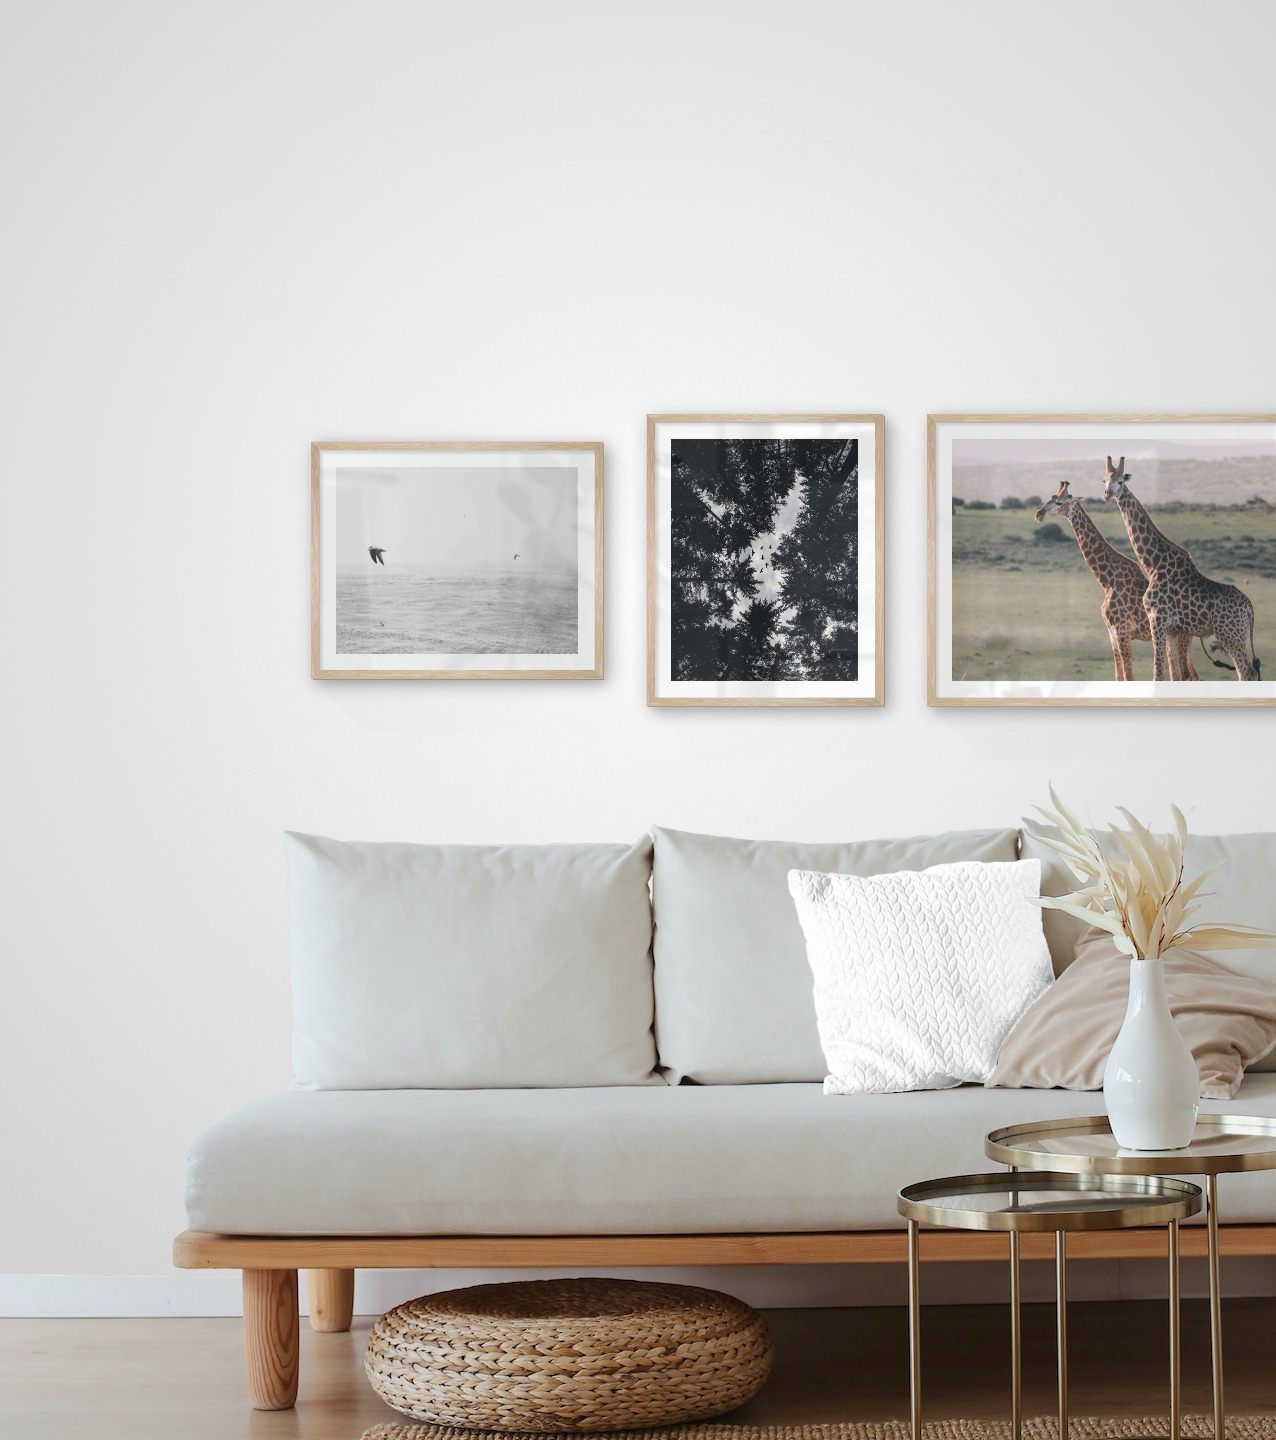 Gallery wall with picture frames in wood in sizes 40x50 and 50x70 with prints "Birds over the sea", "Wooden tops and birds" and "Two giraffes"